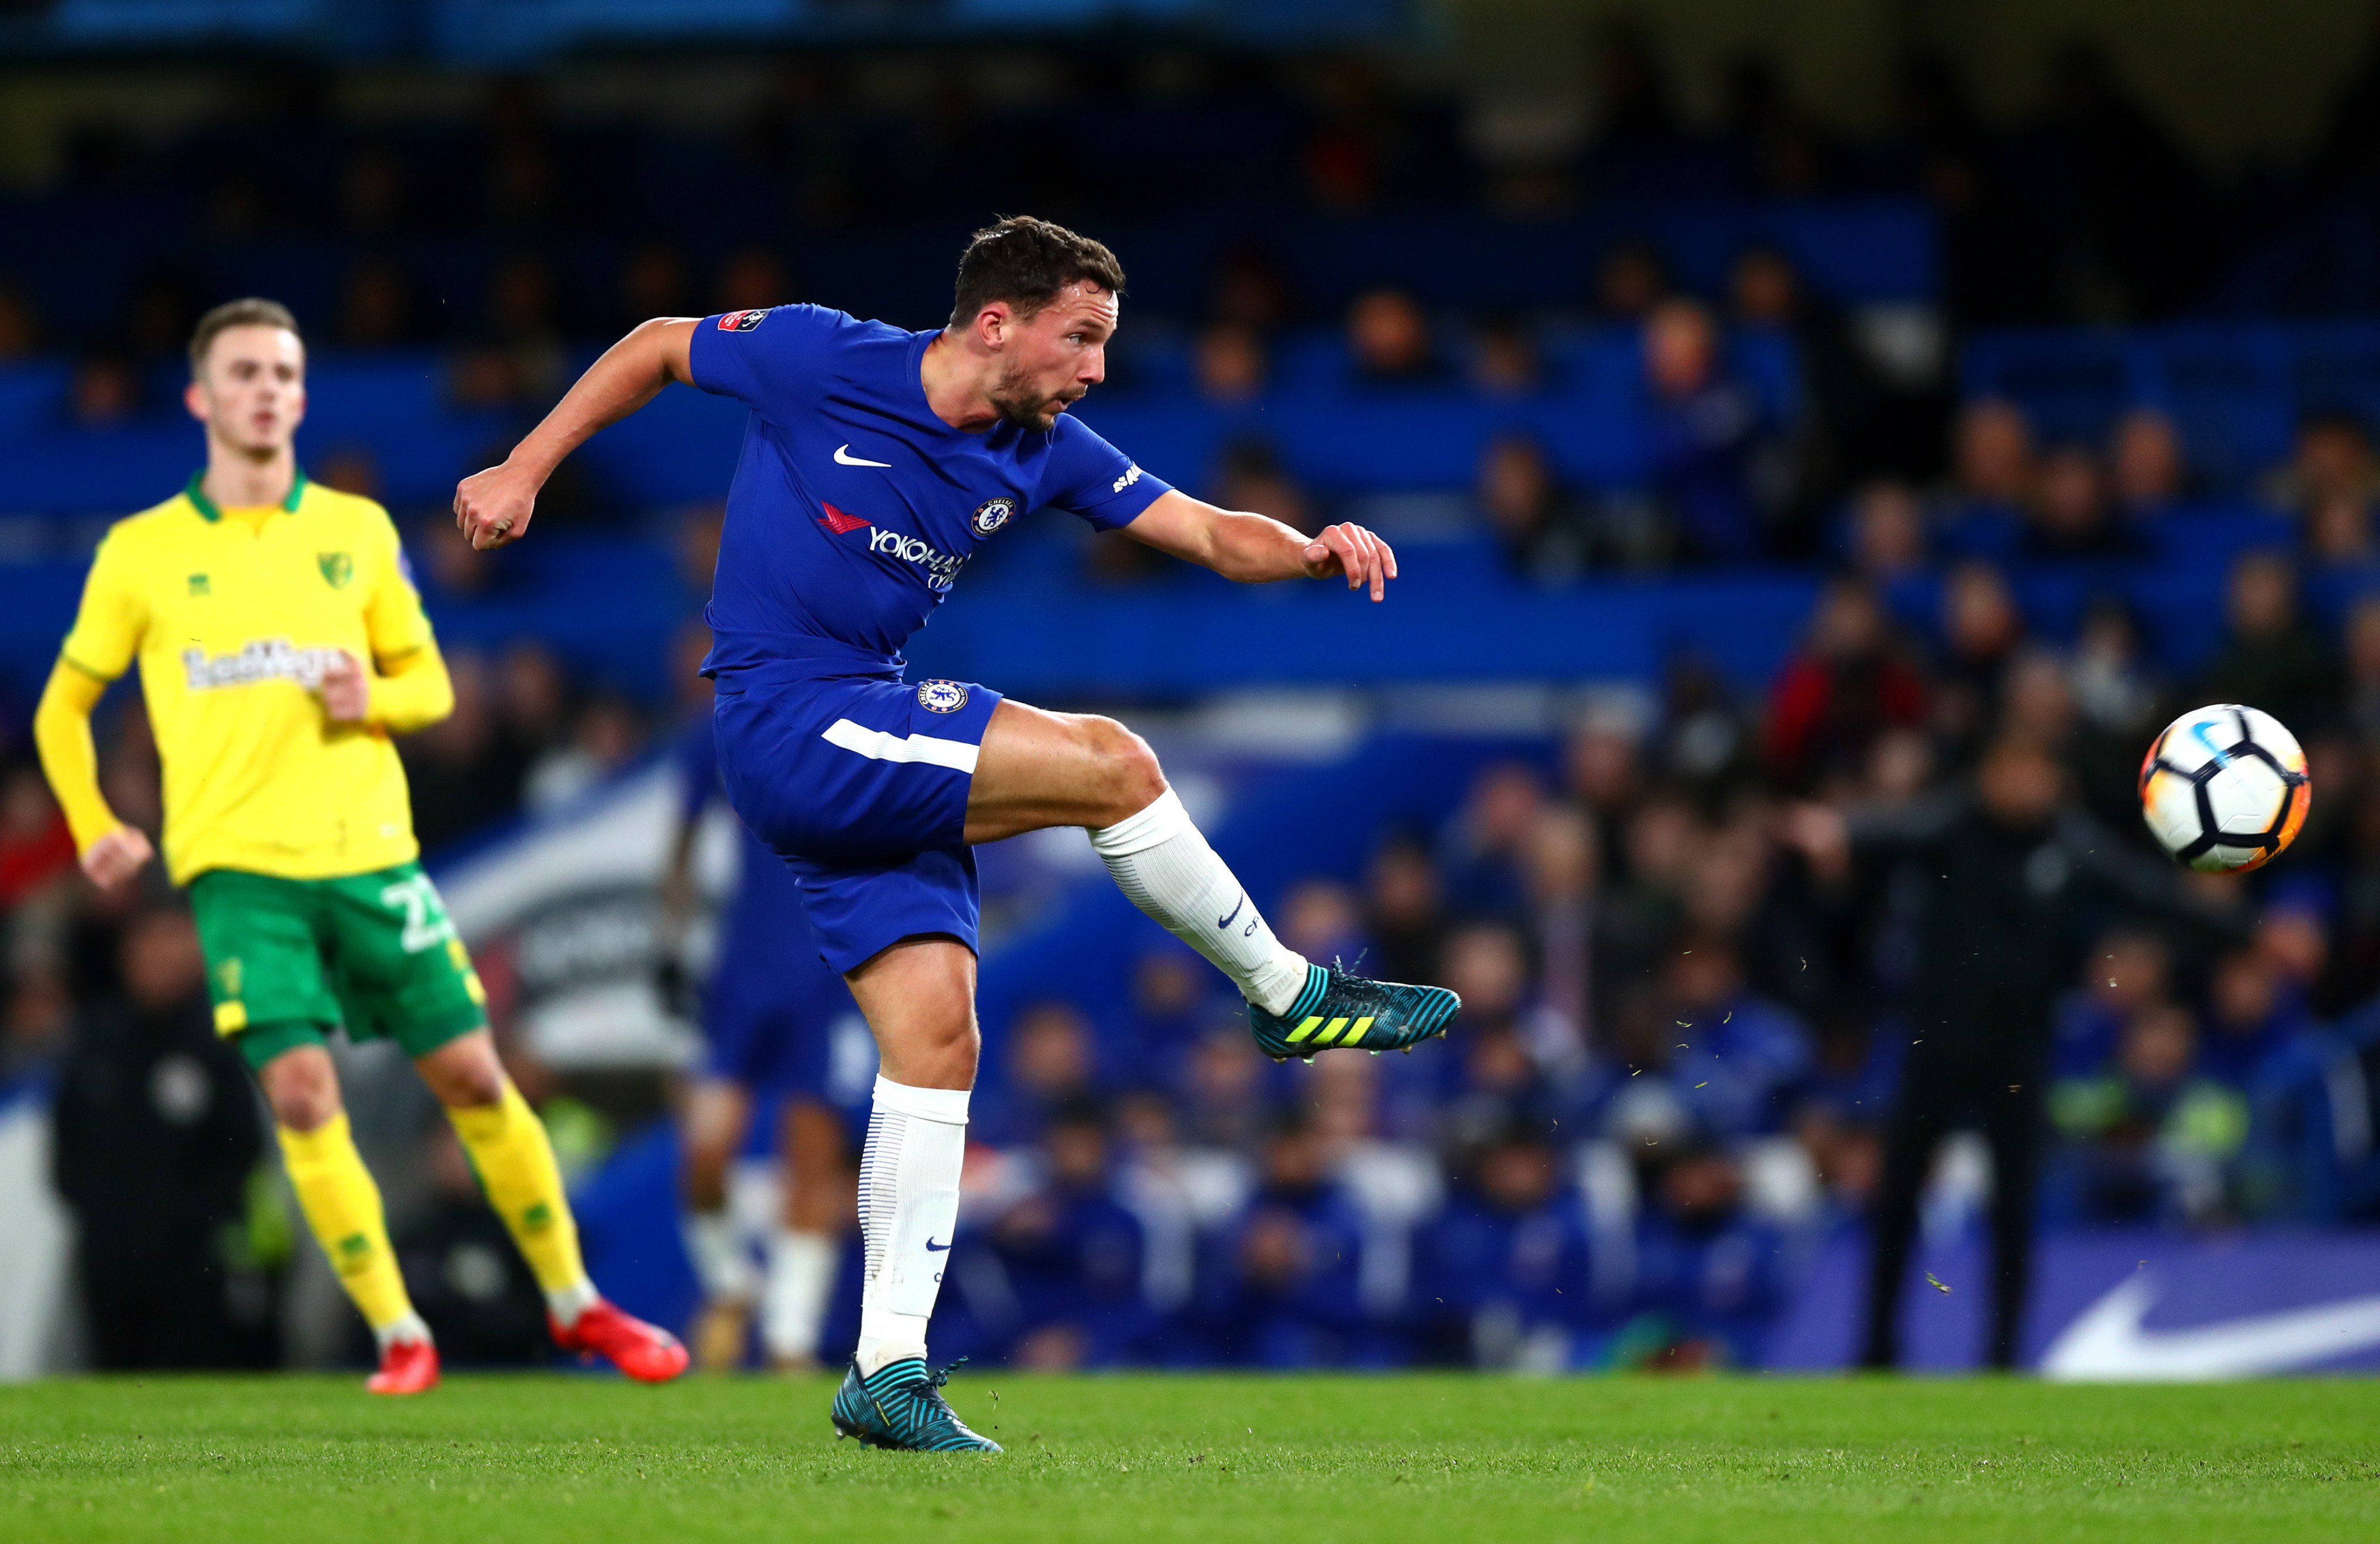 Relieved because situation wasn't good for me or club, reveals Danny Drinkwater